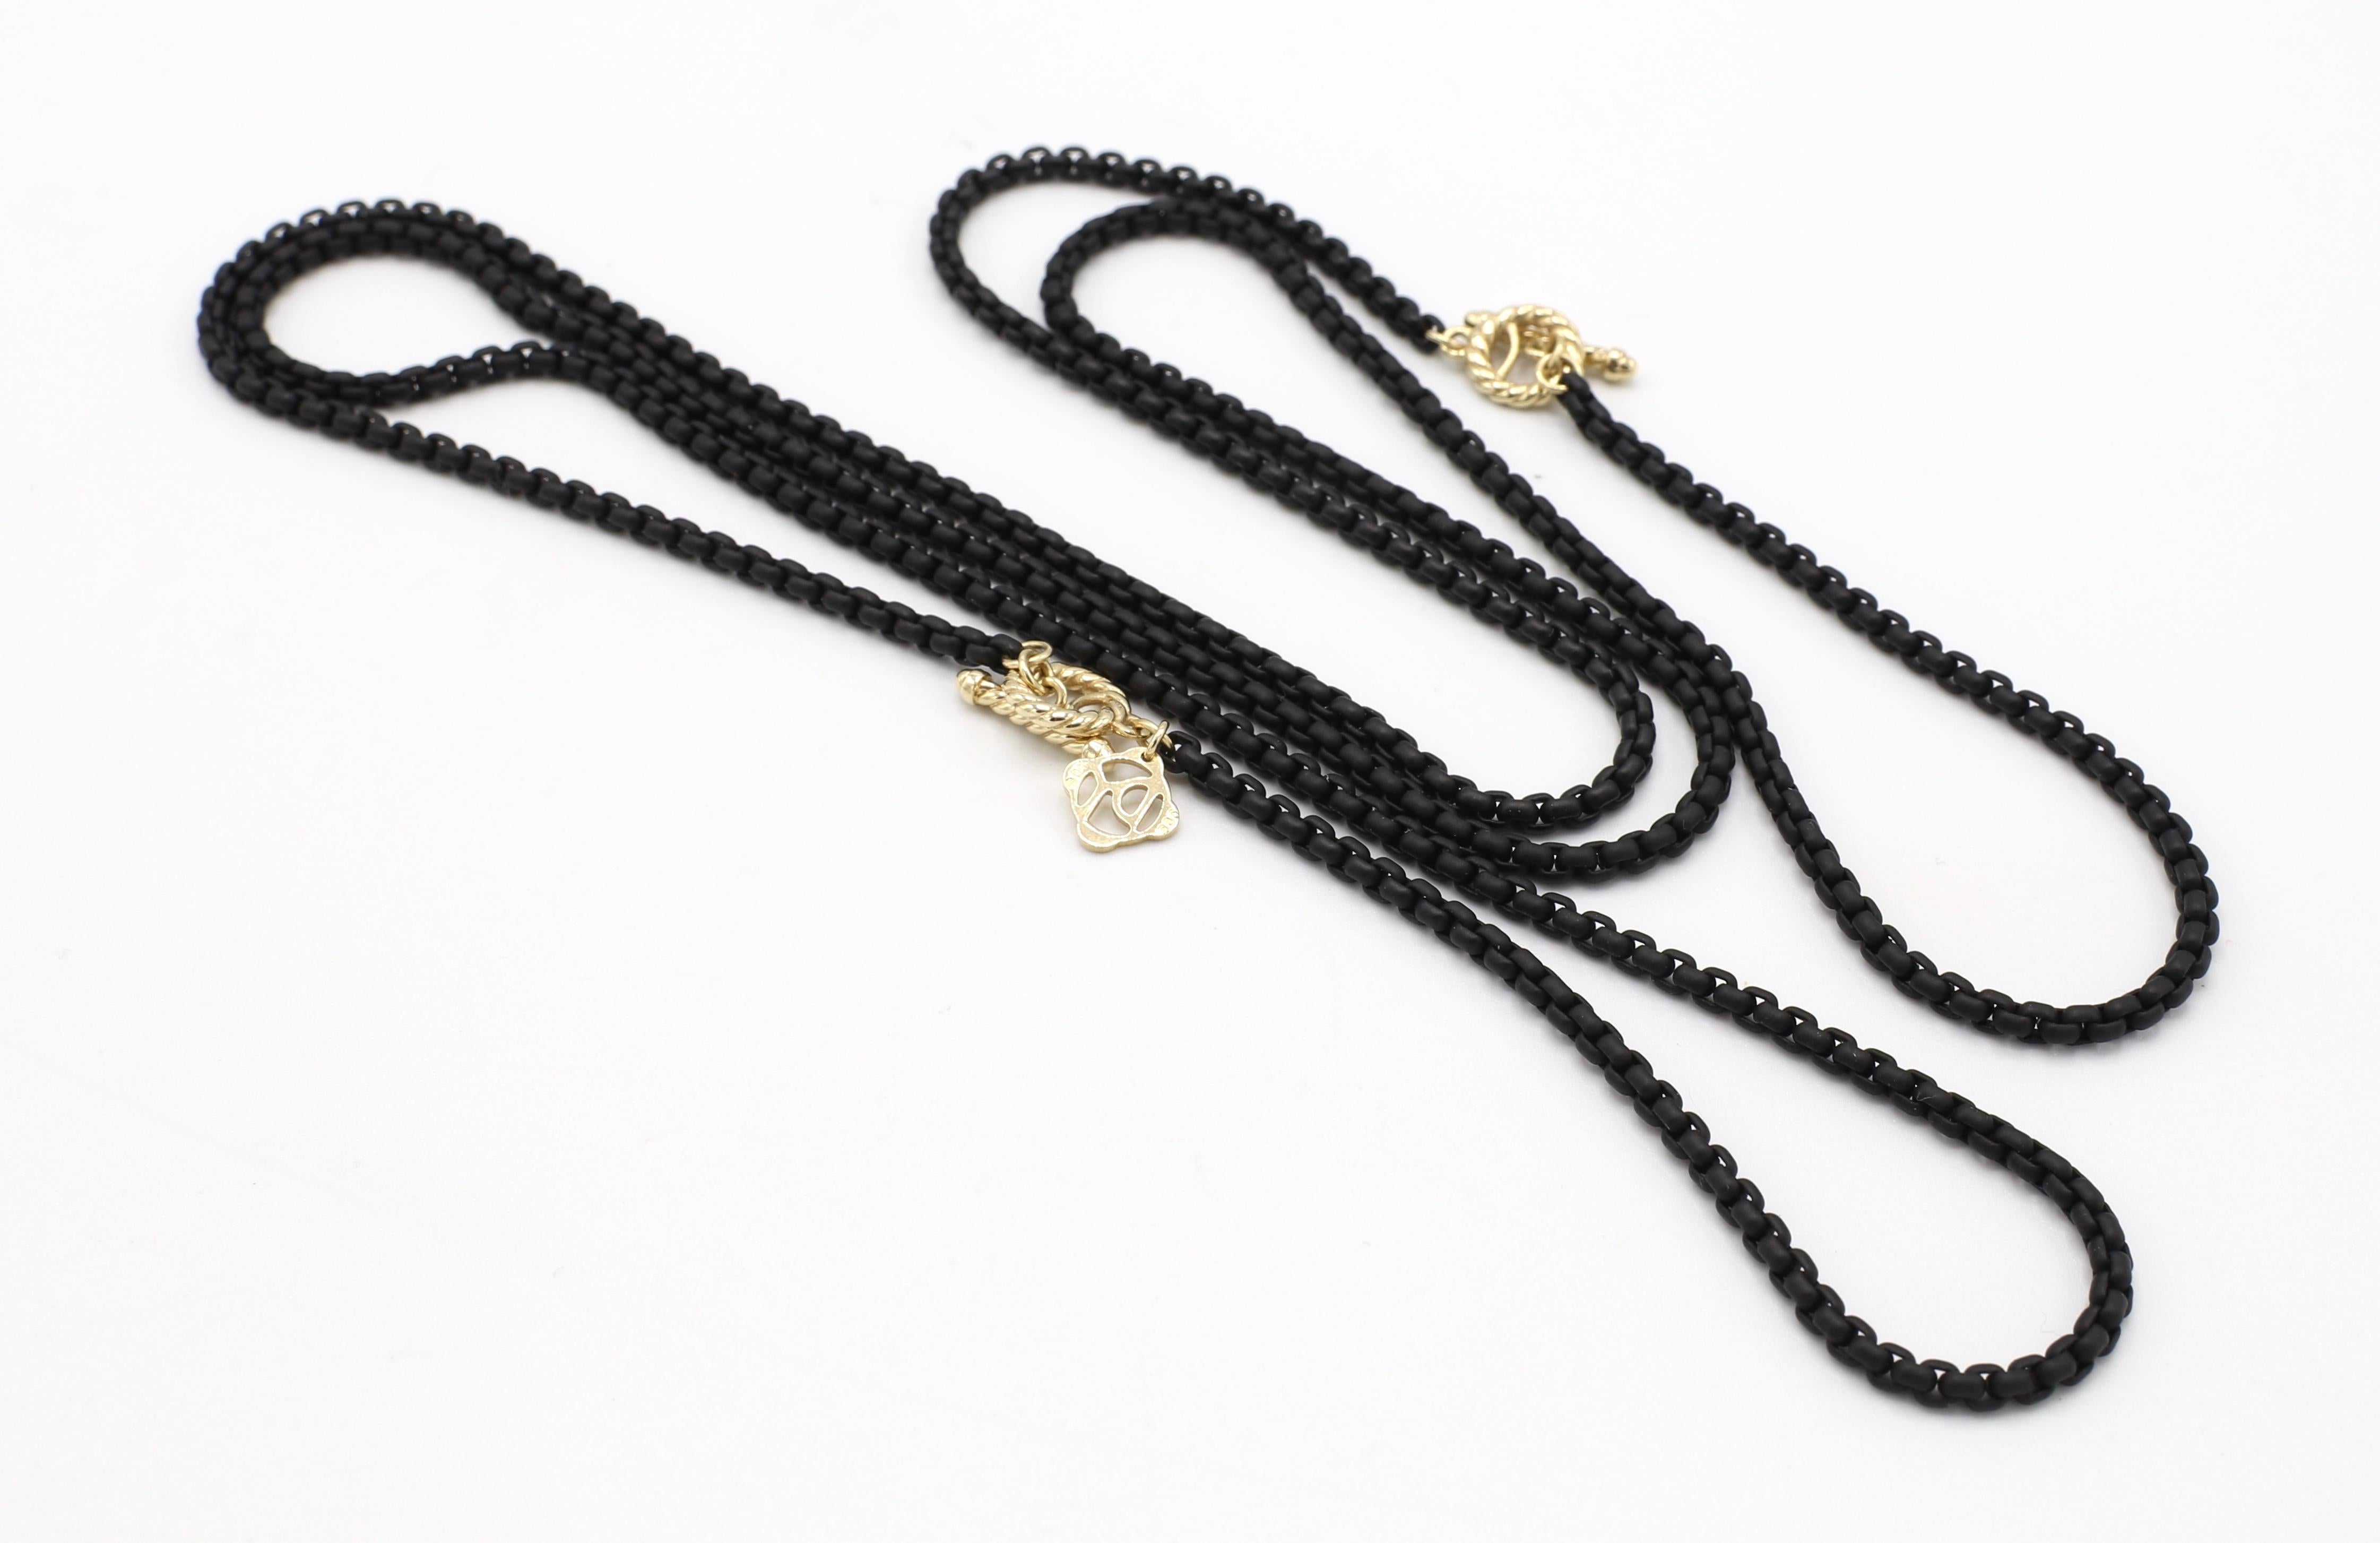 Modern David Yurman Bel Aire Black Acrylic Chain Necklace with 14 Karat Gold Accents